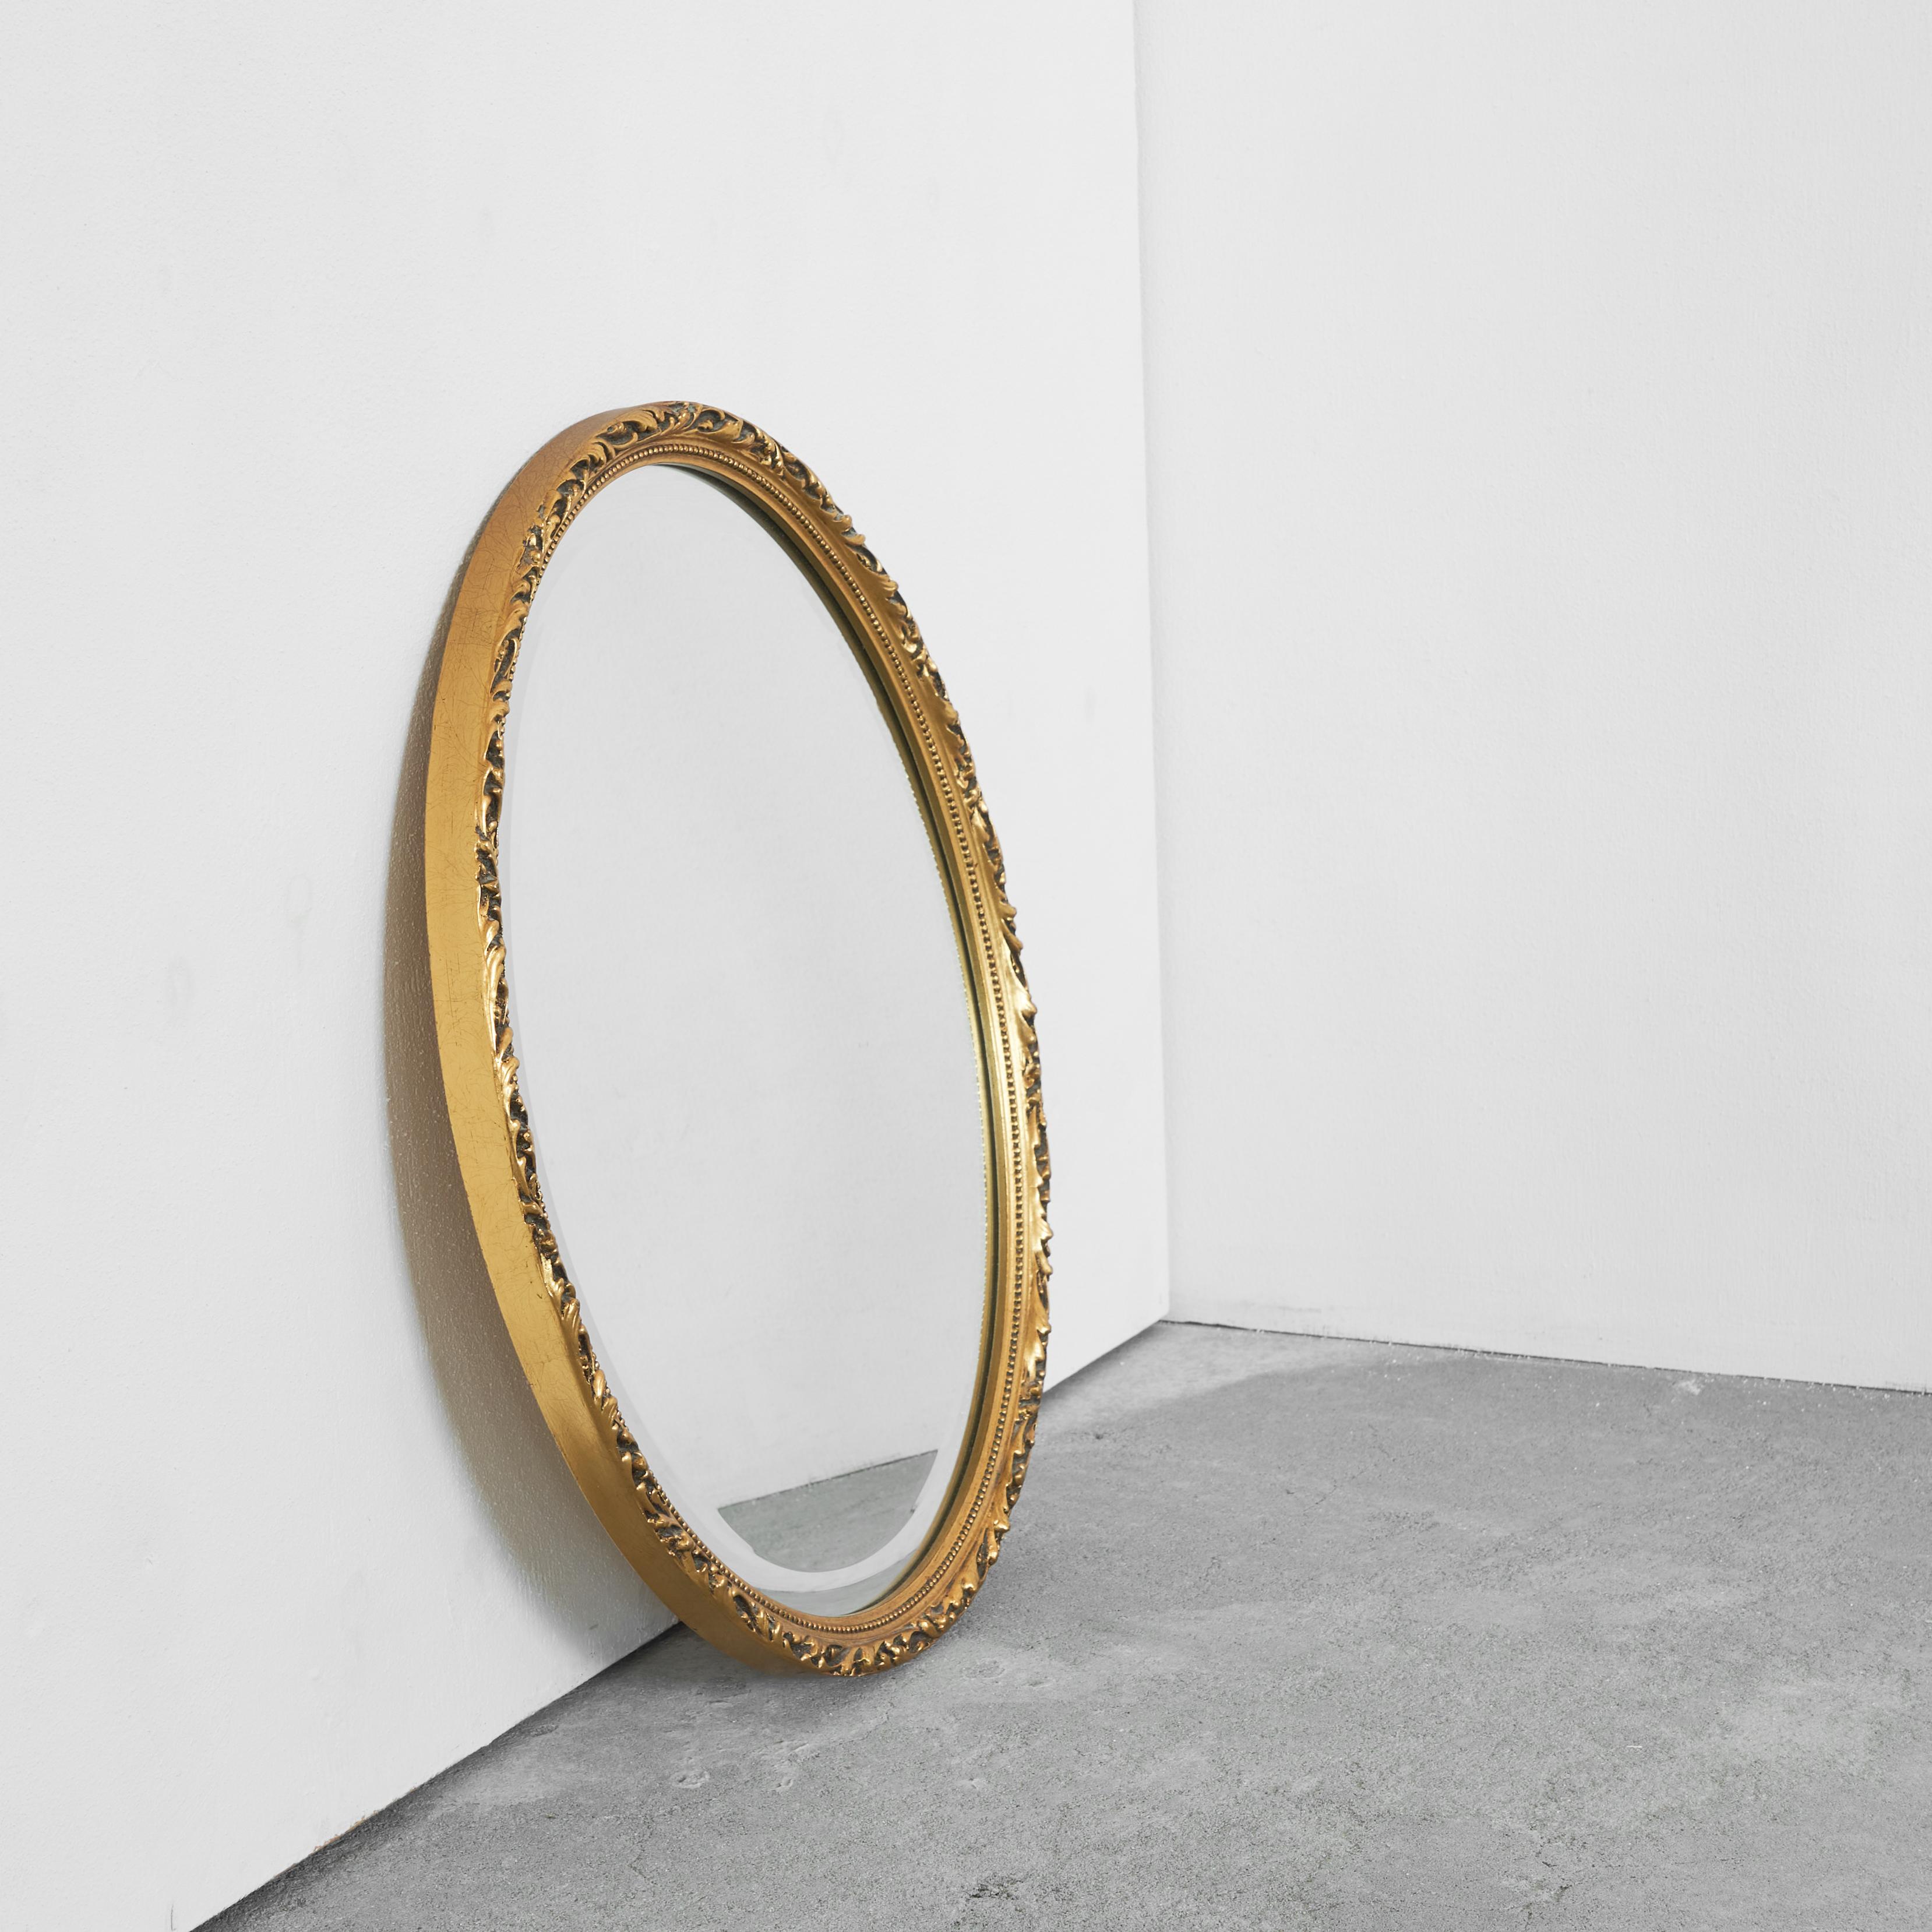 European Oval Mirror in Gold Painted Wood 1960s For Sale